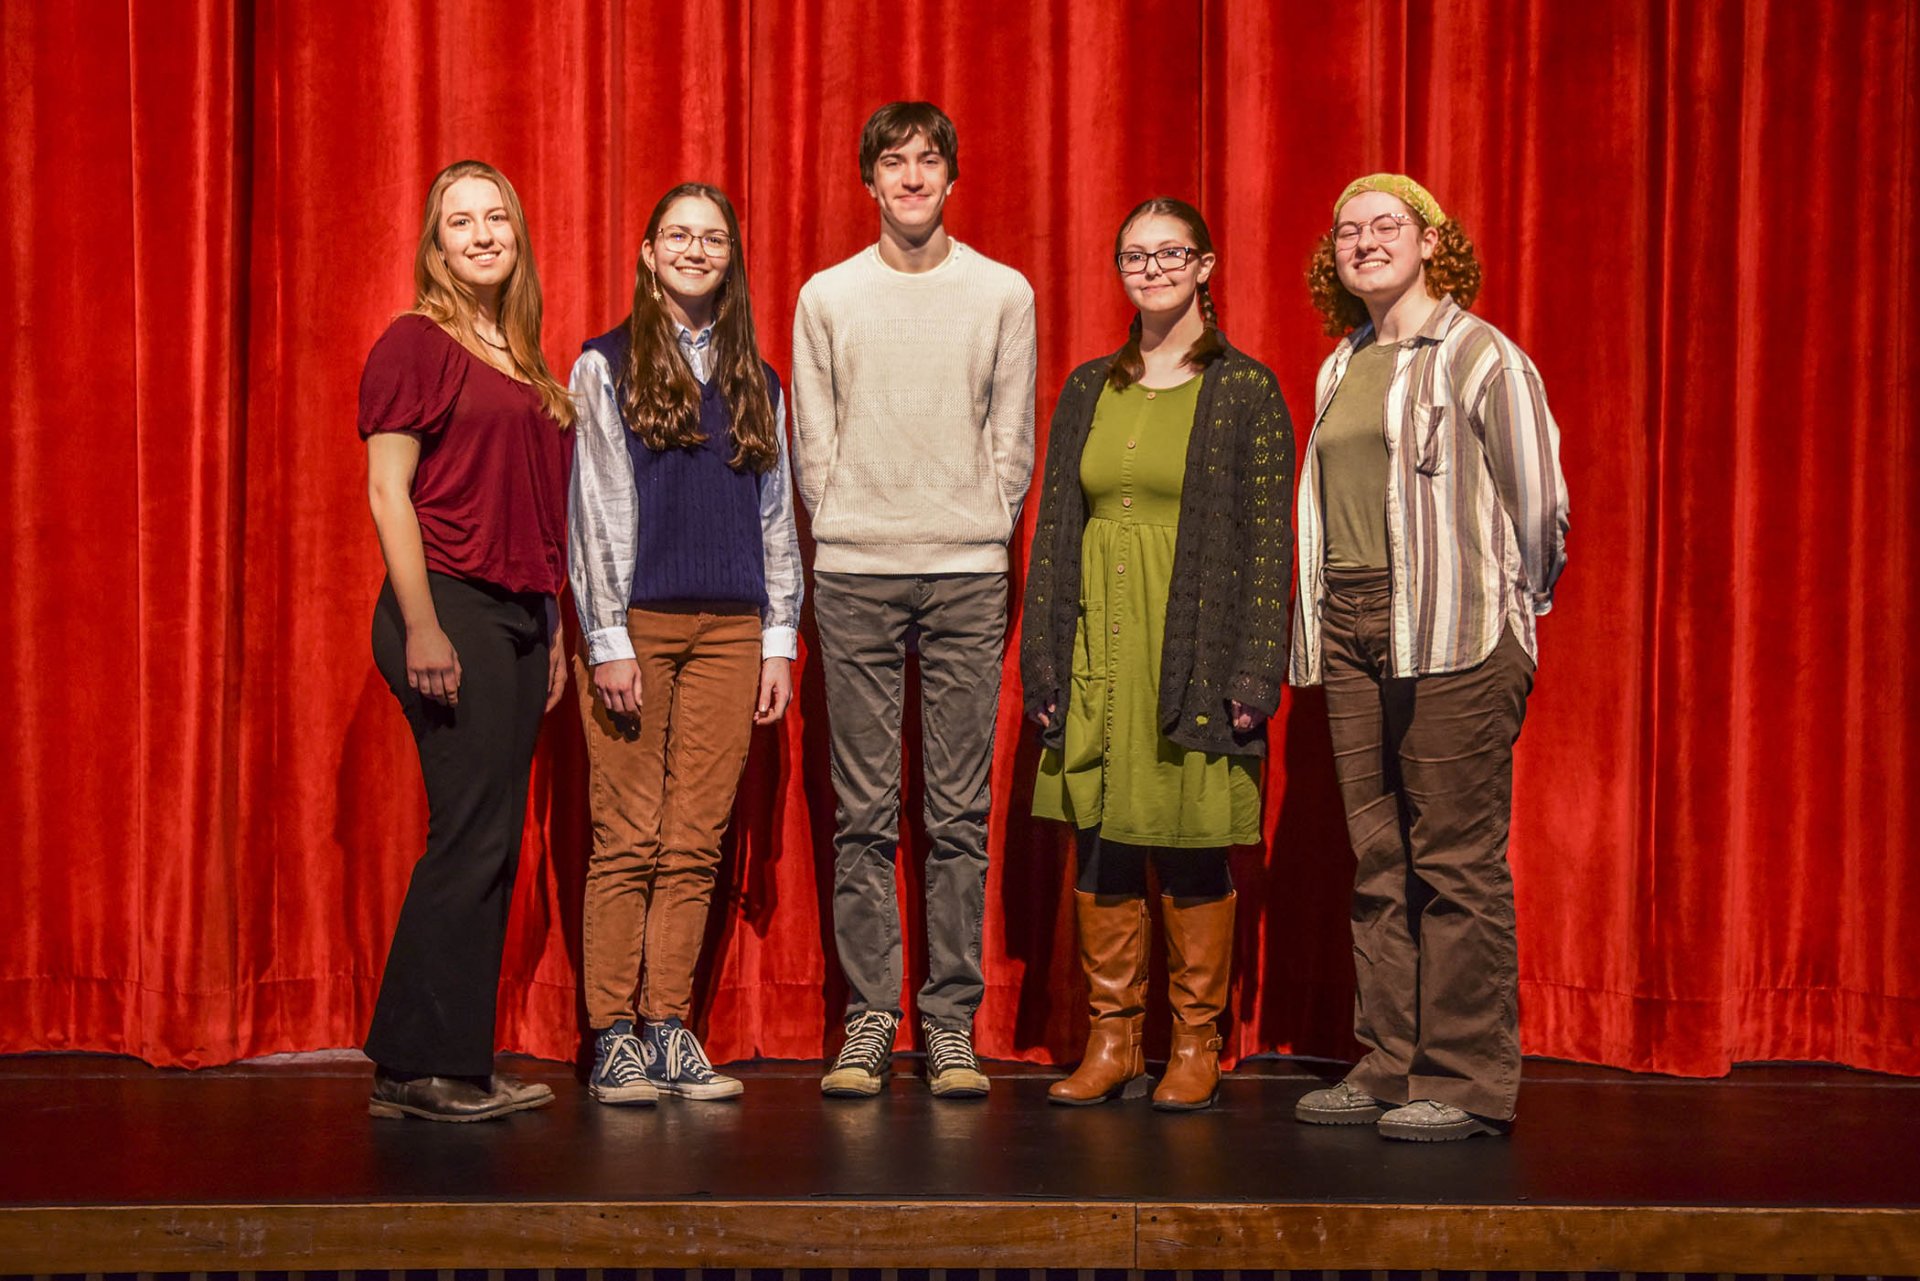 LI Students Selected for the New England Music Festival